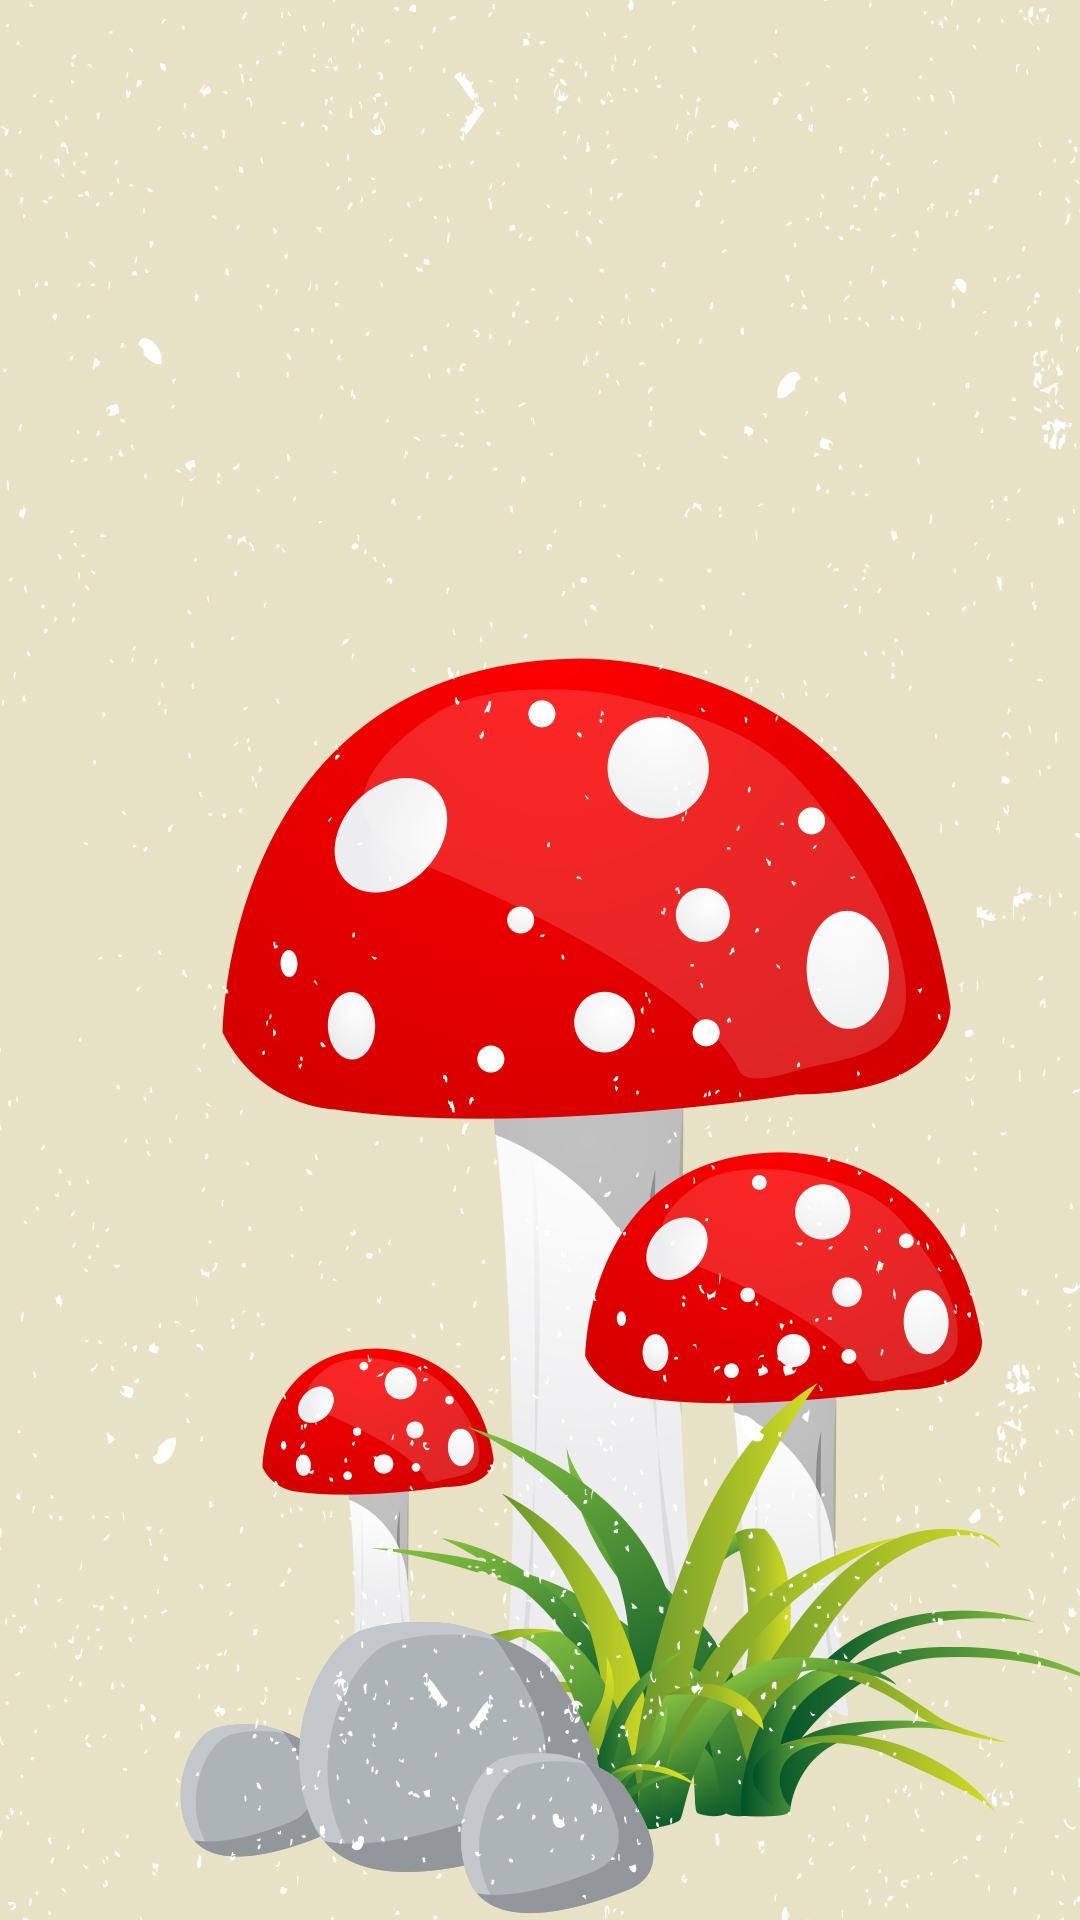 Wallpaper mushroom Images - Search Images on Everypixel